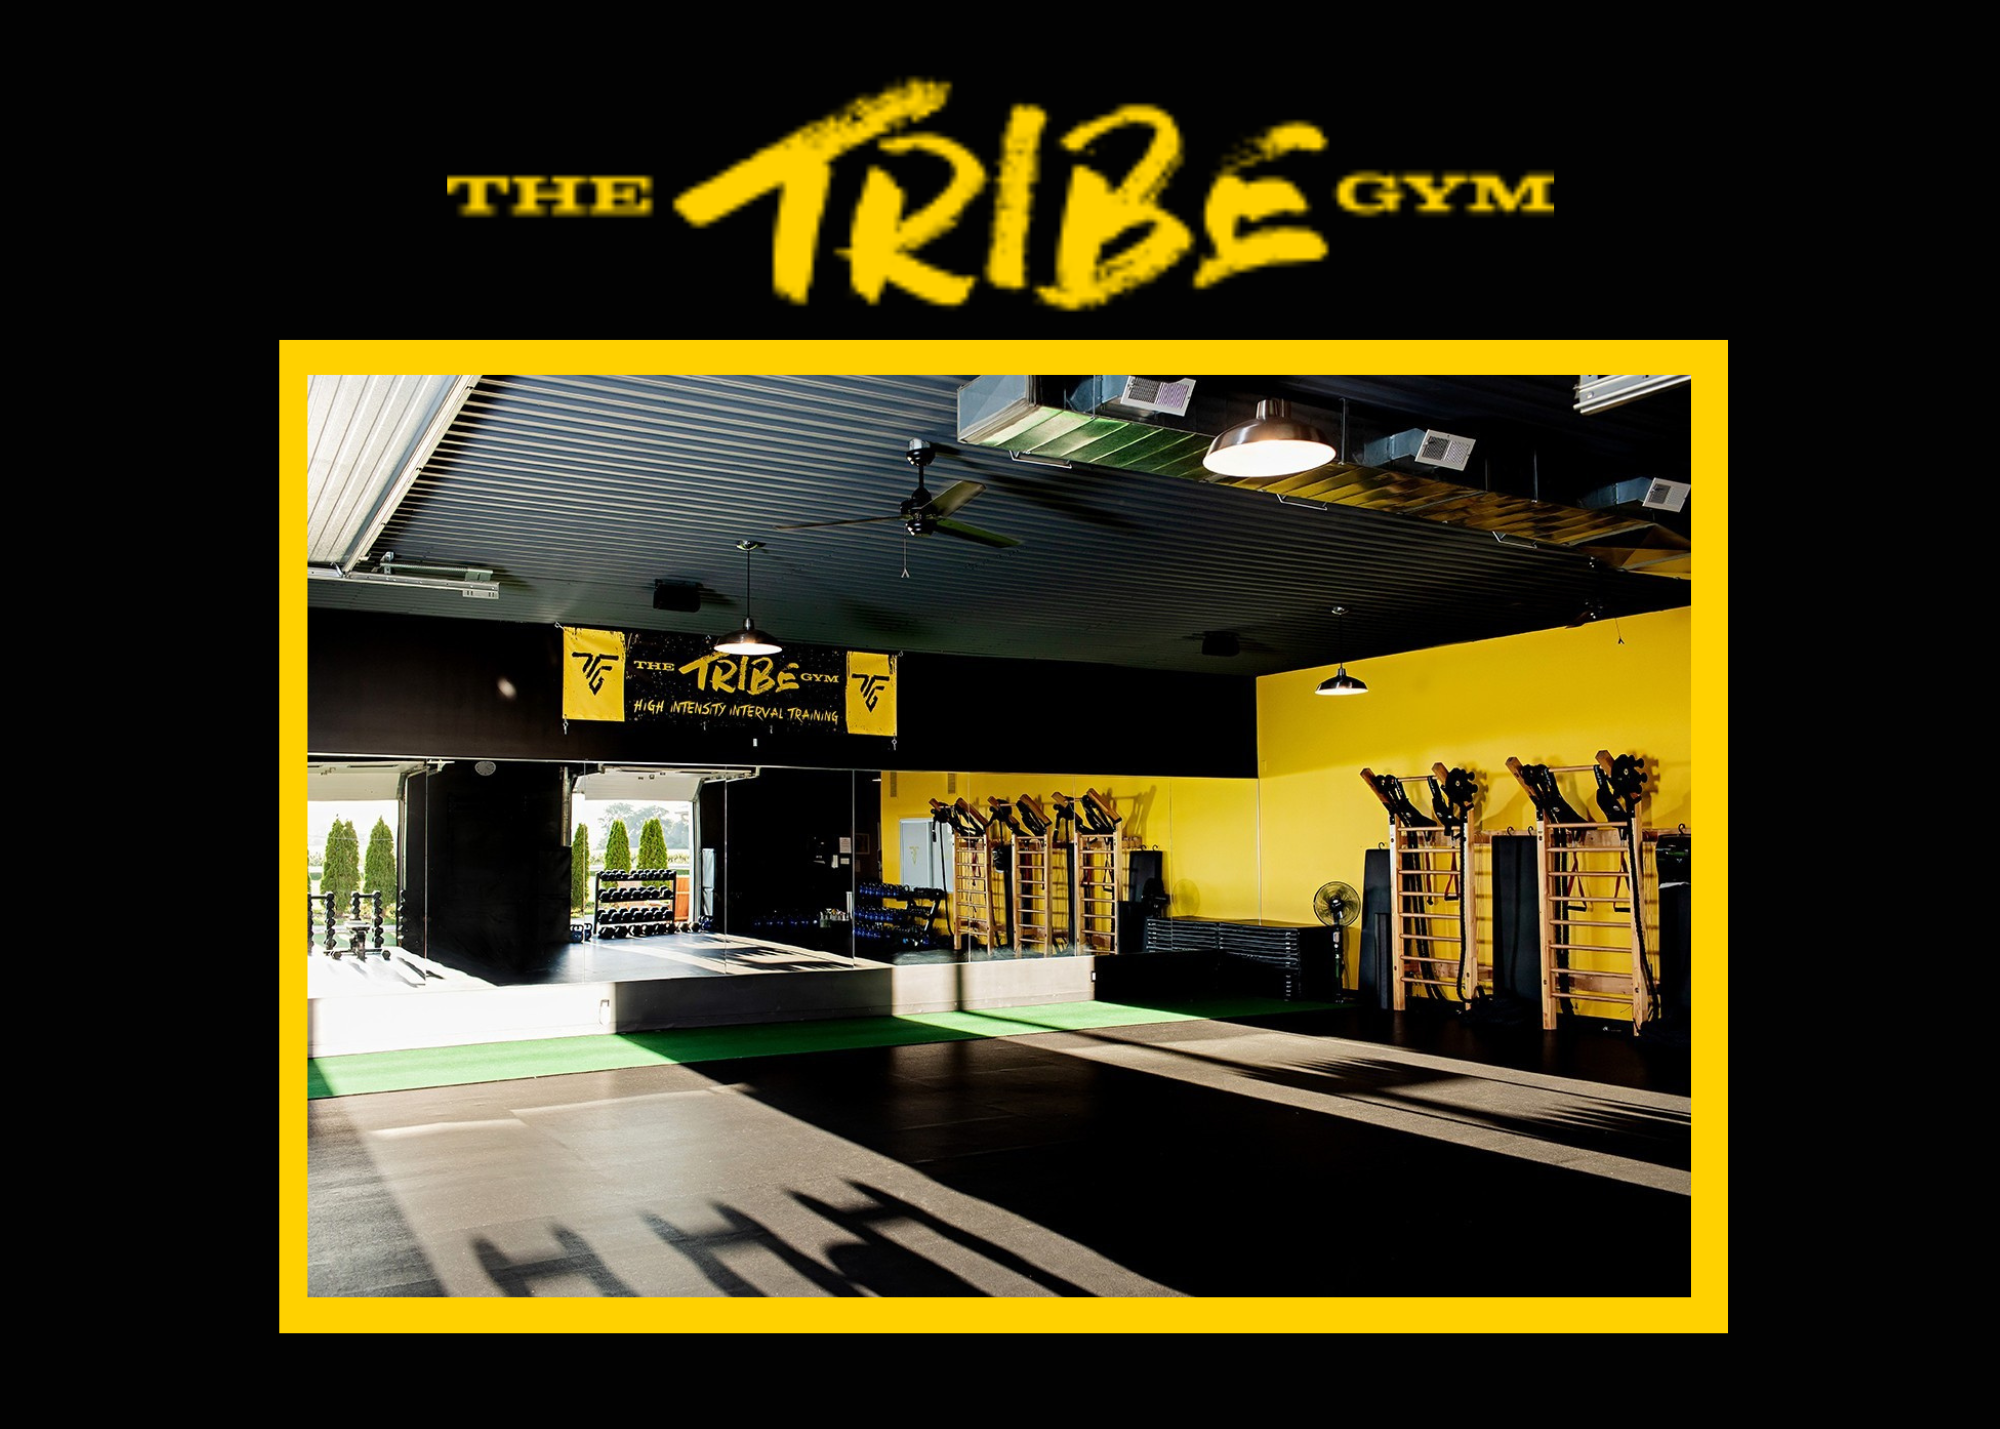 the tribe guy, black and yellow gym 